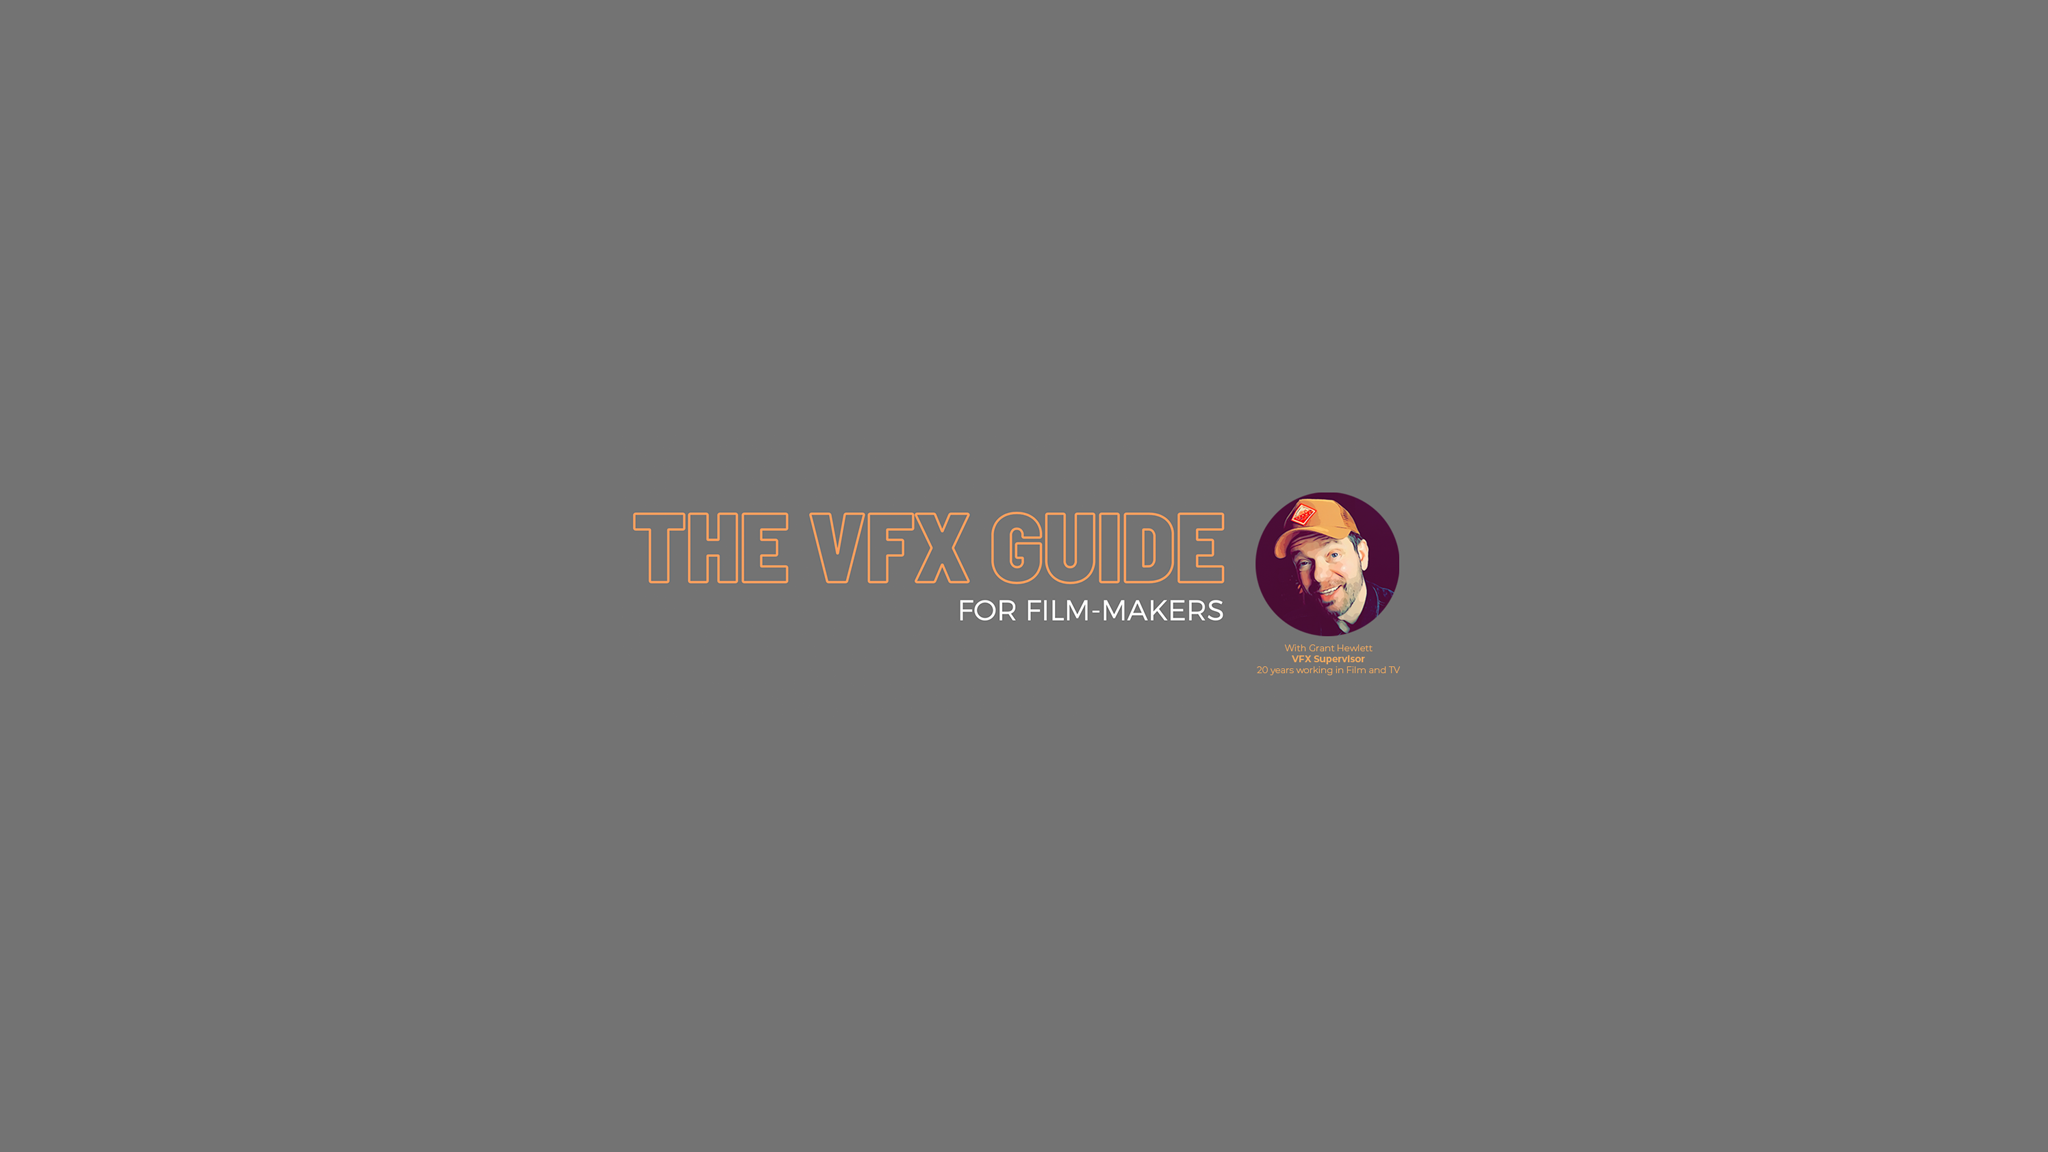 The VFX Guide